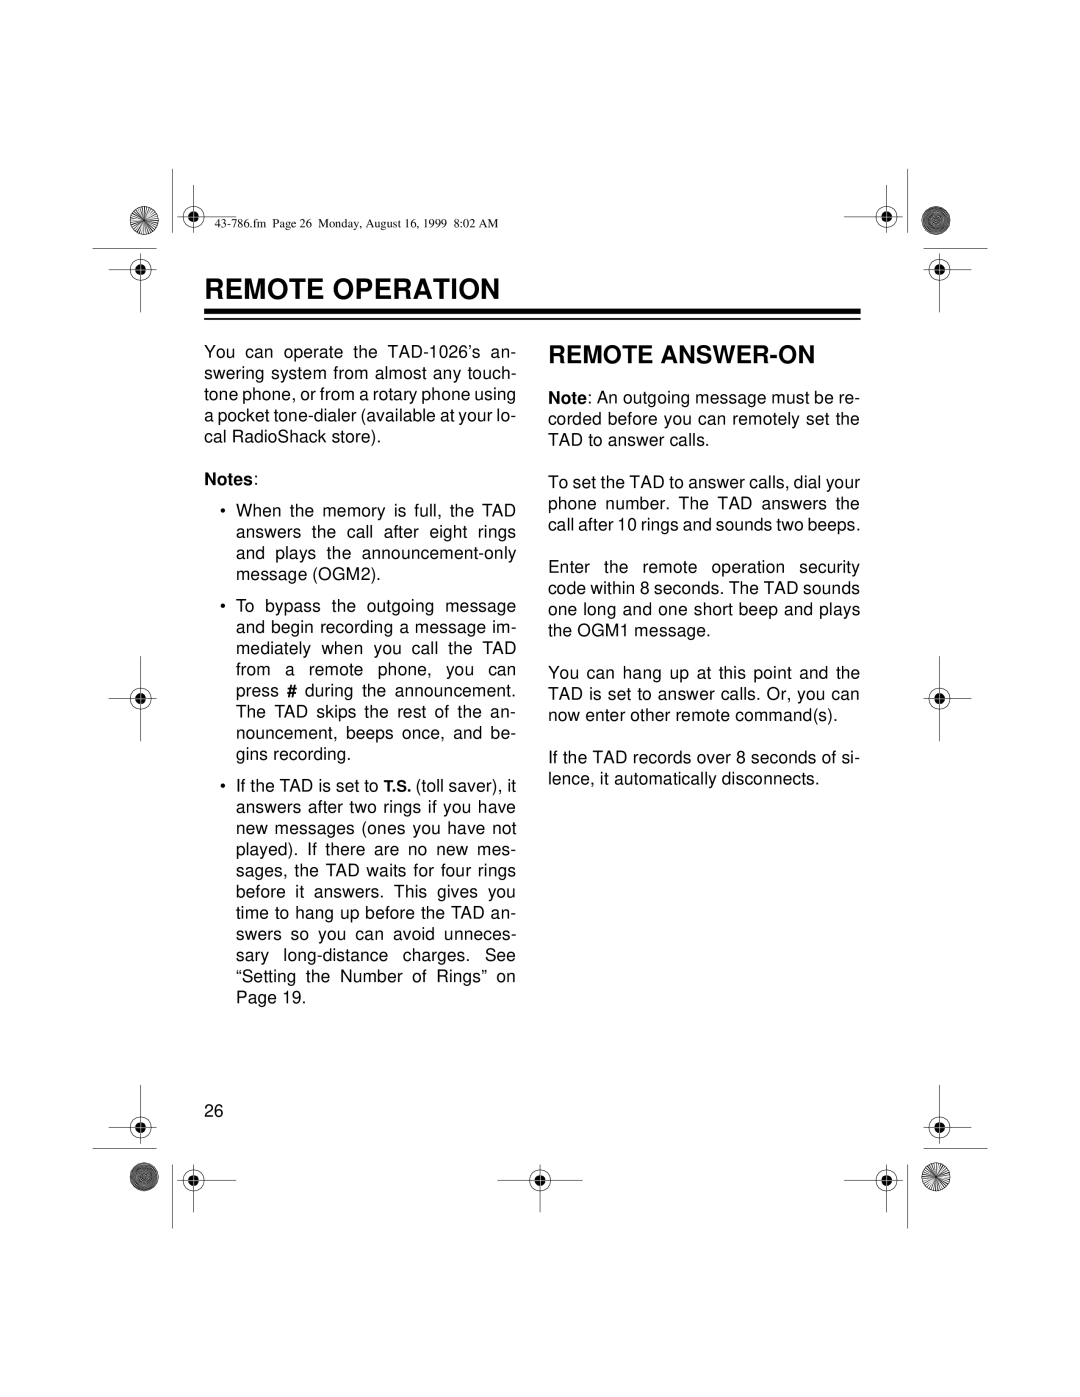 Radio Shack TAD-1026 owner manual Remote Operation, Remote ANSWER-ON 